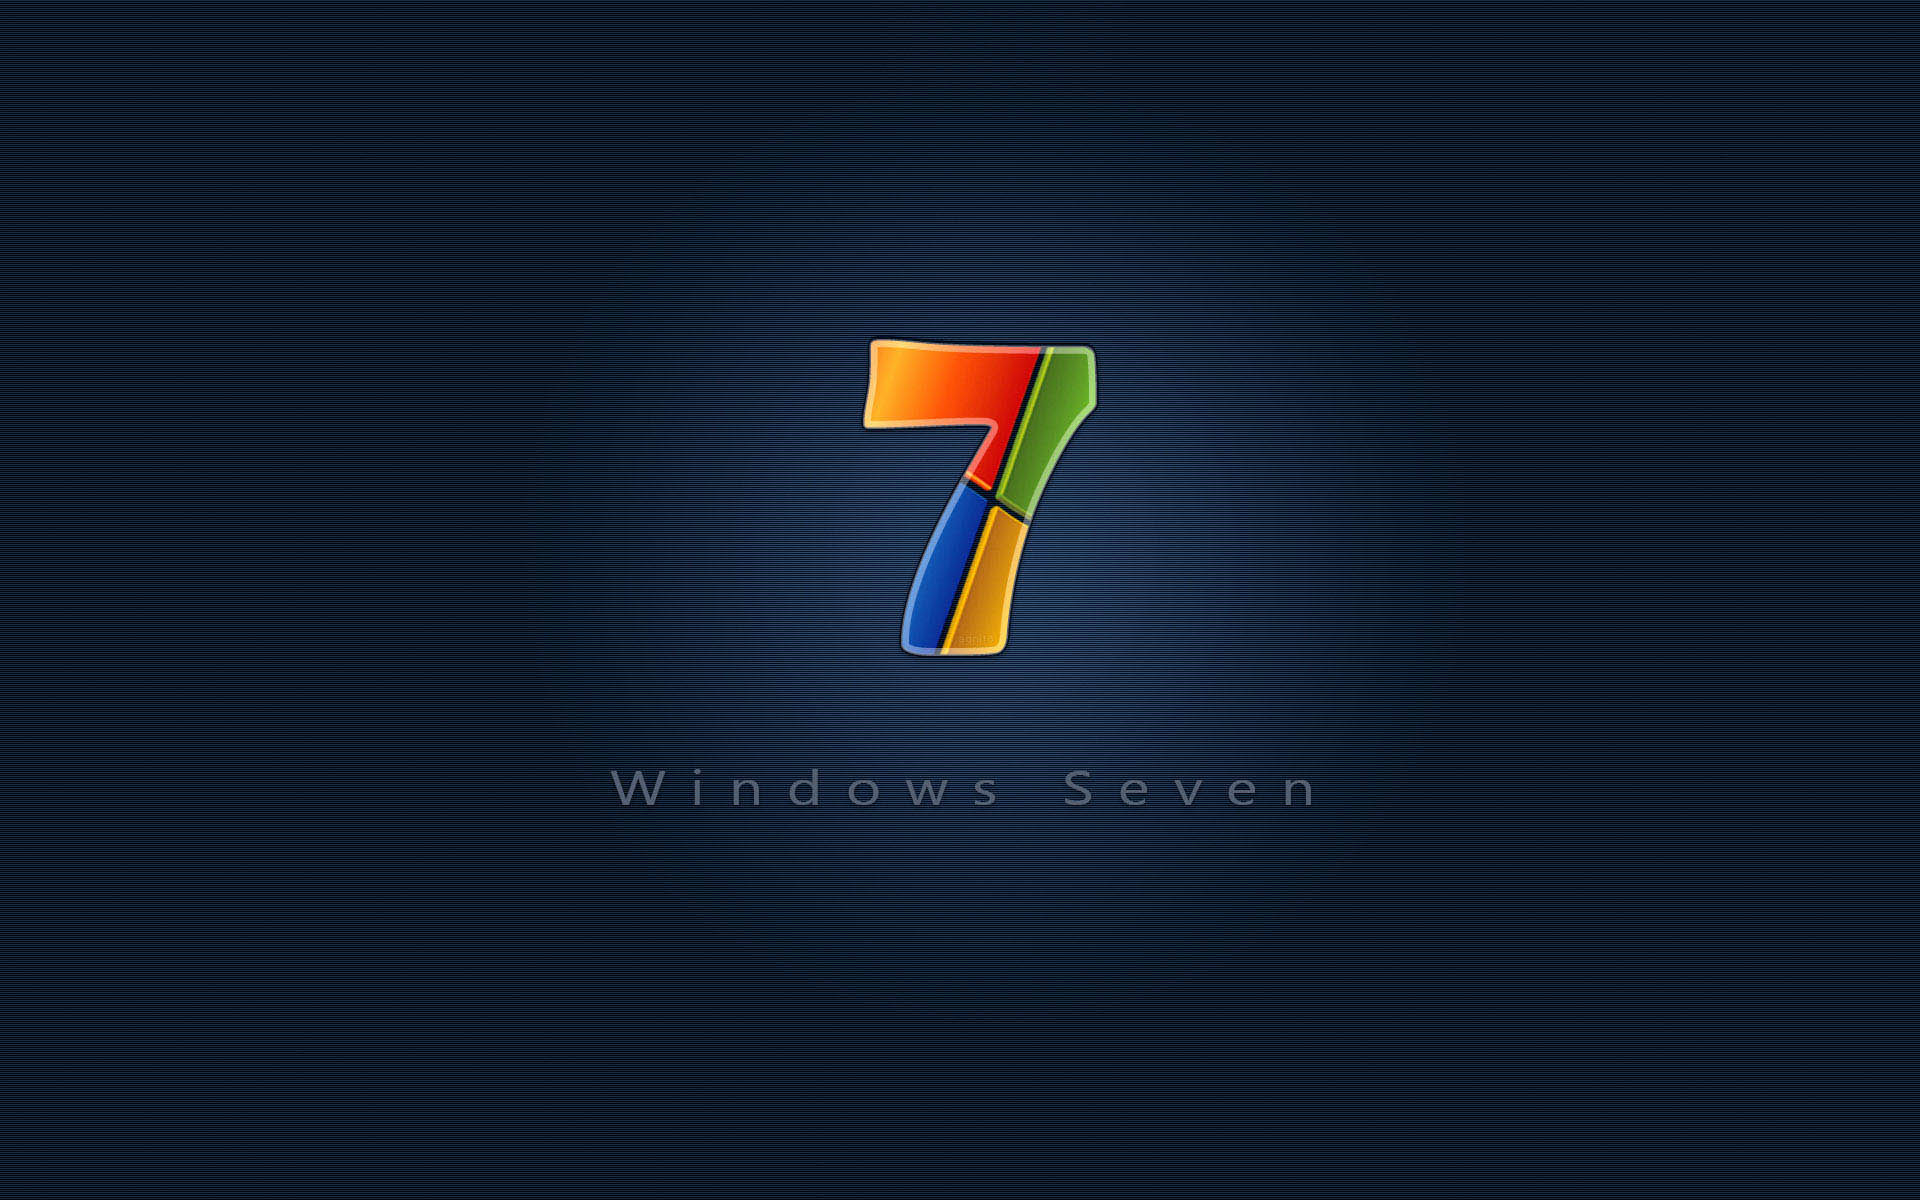 Free HQ Windows 7 Ultimate 42 Wallpaper   Free HQ Wallpapers